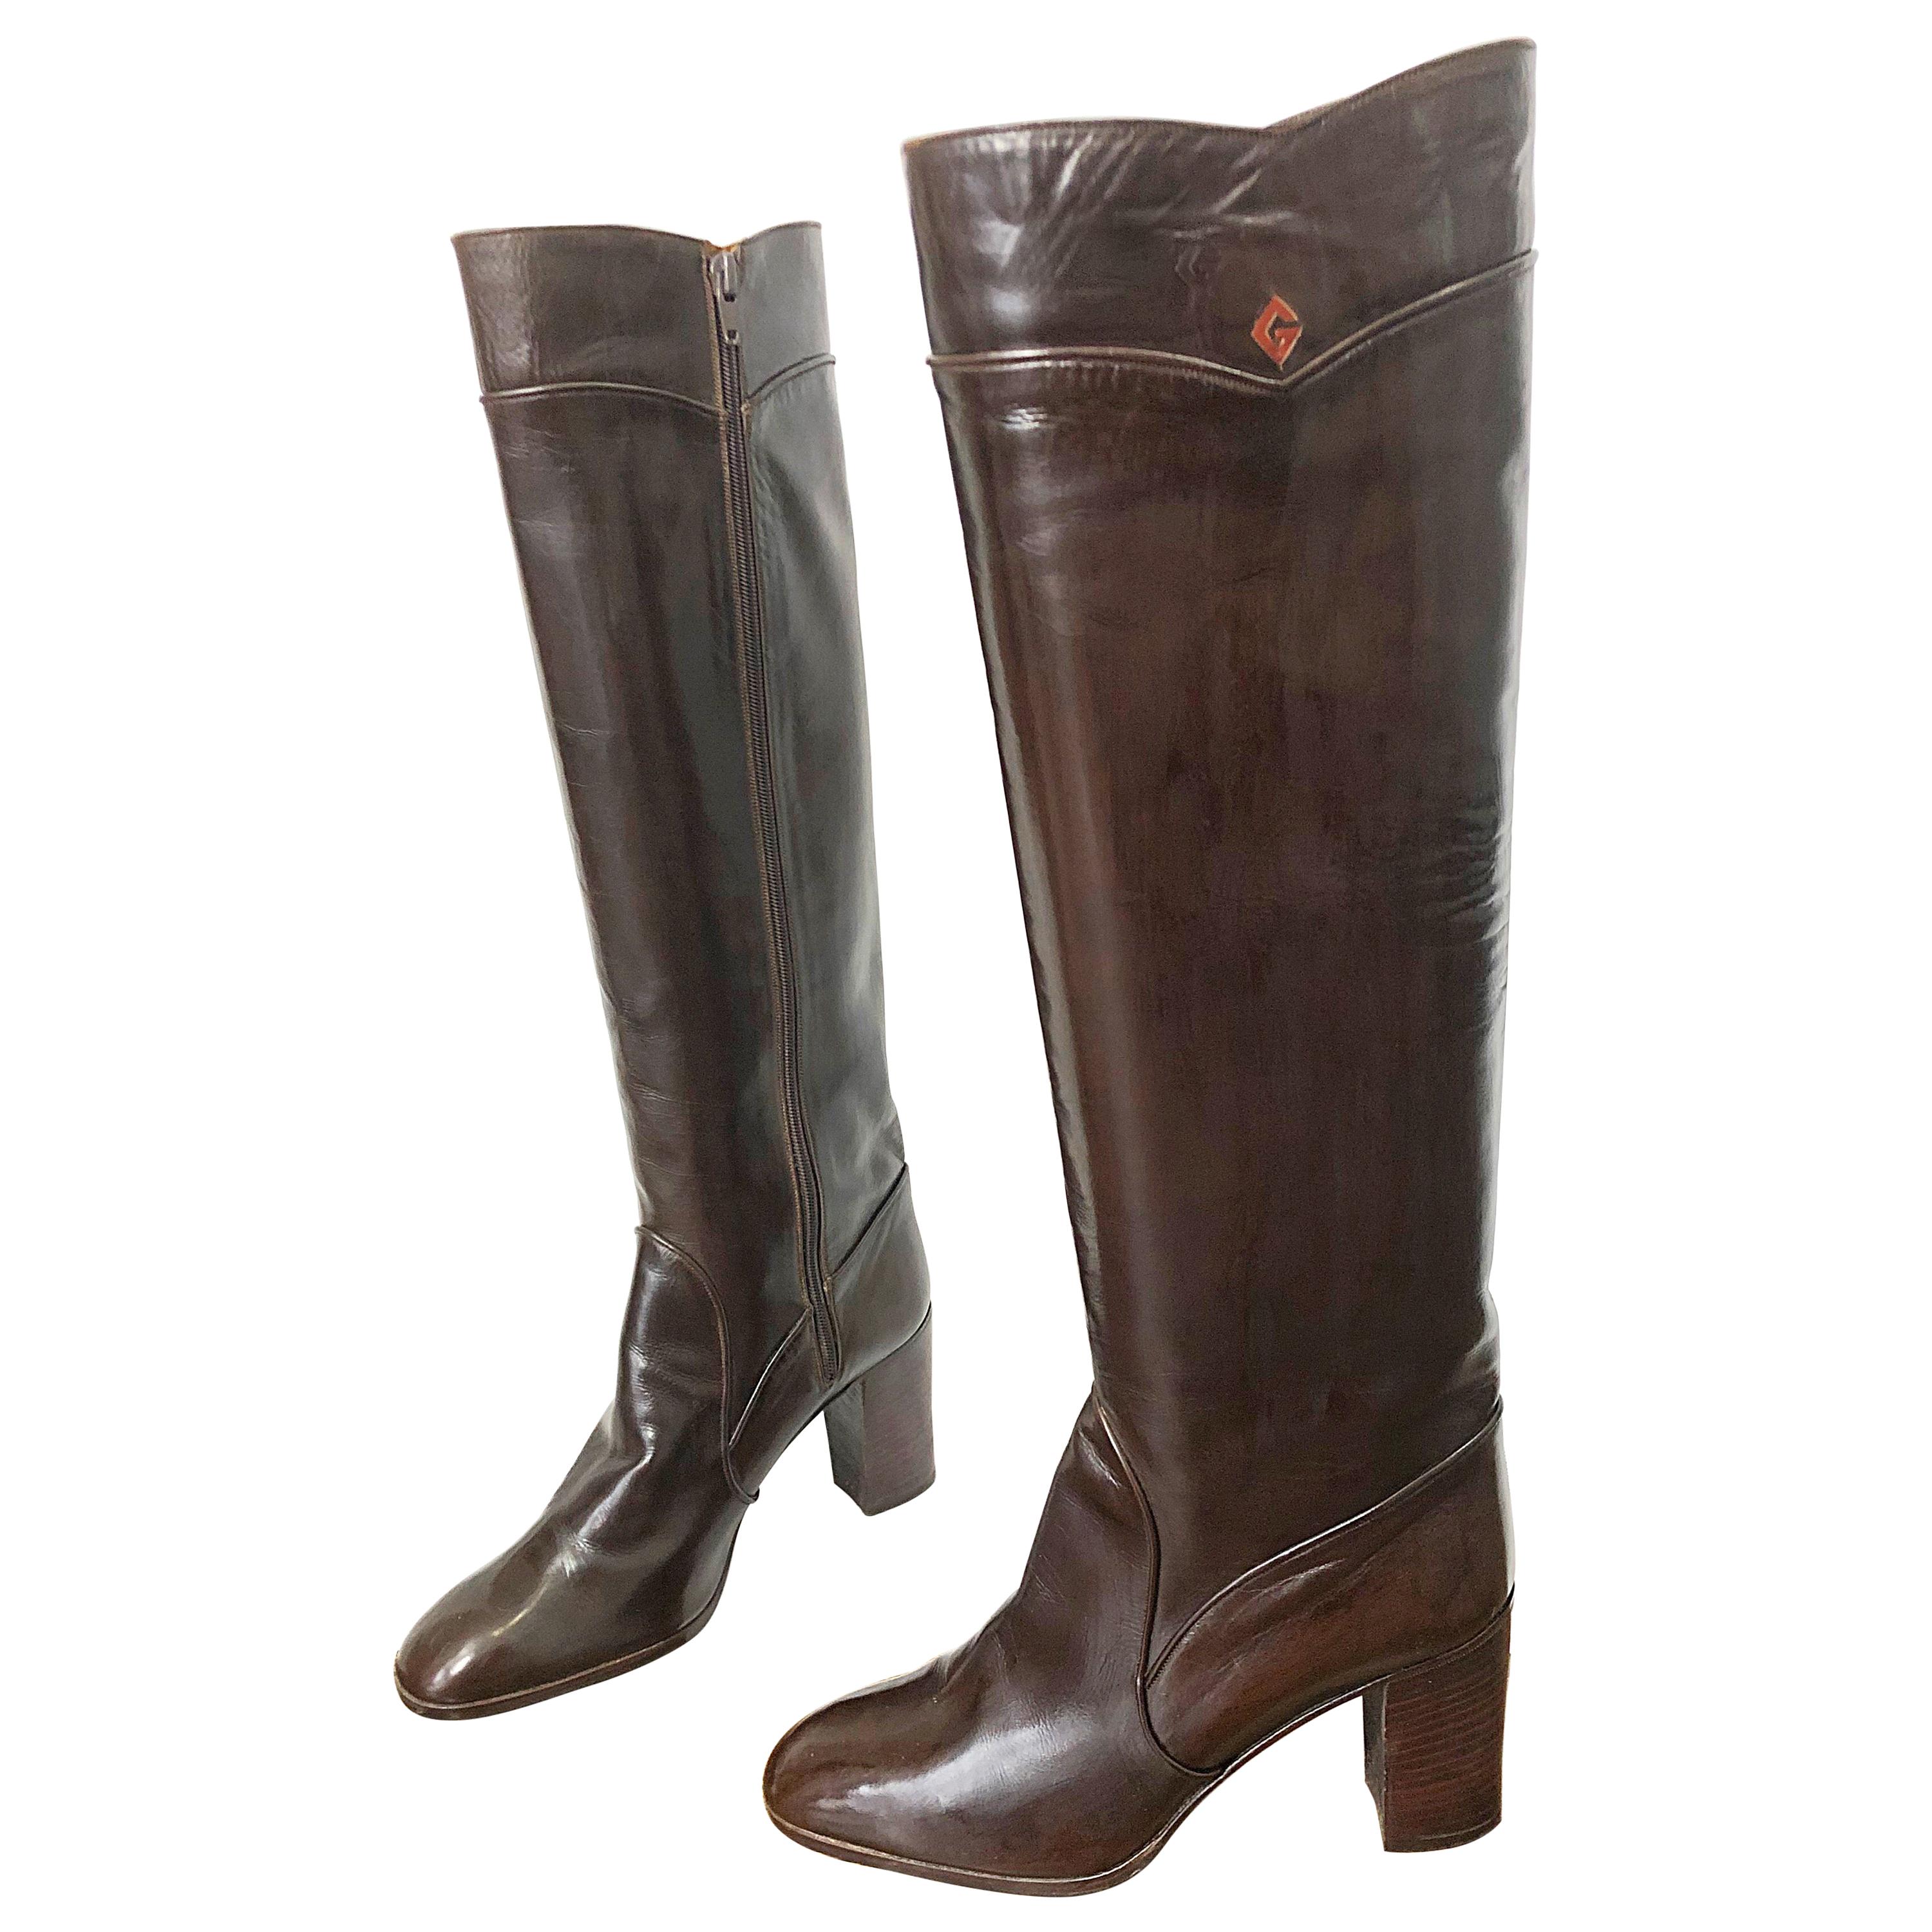 Gucci 1970s Size 8.5 Chocolate Brown Leather Knee High Heel Vintage 70s Boots 